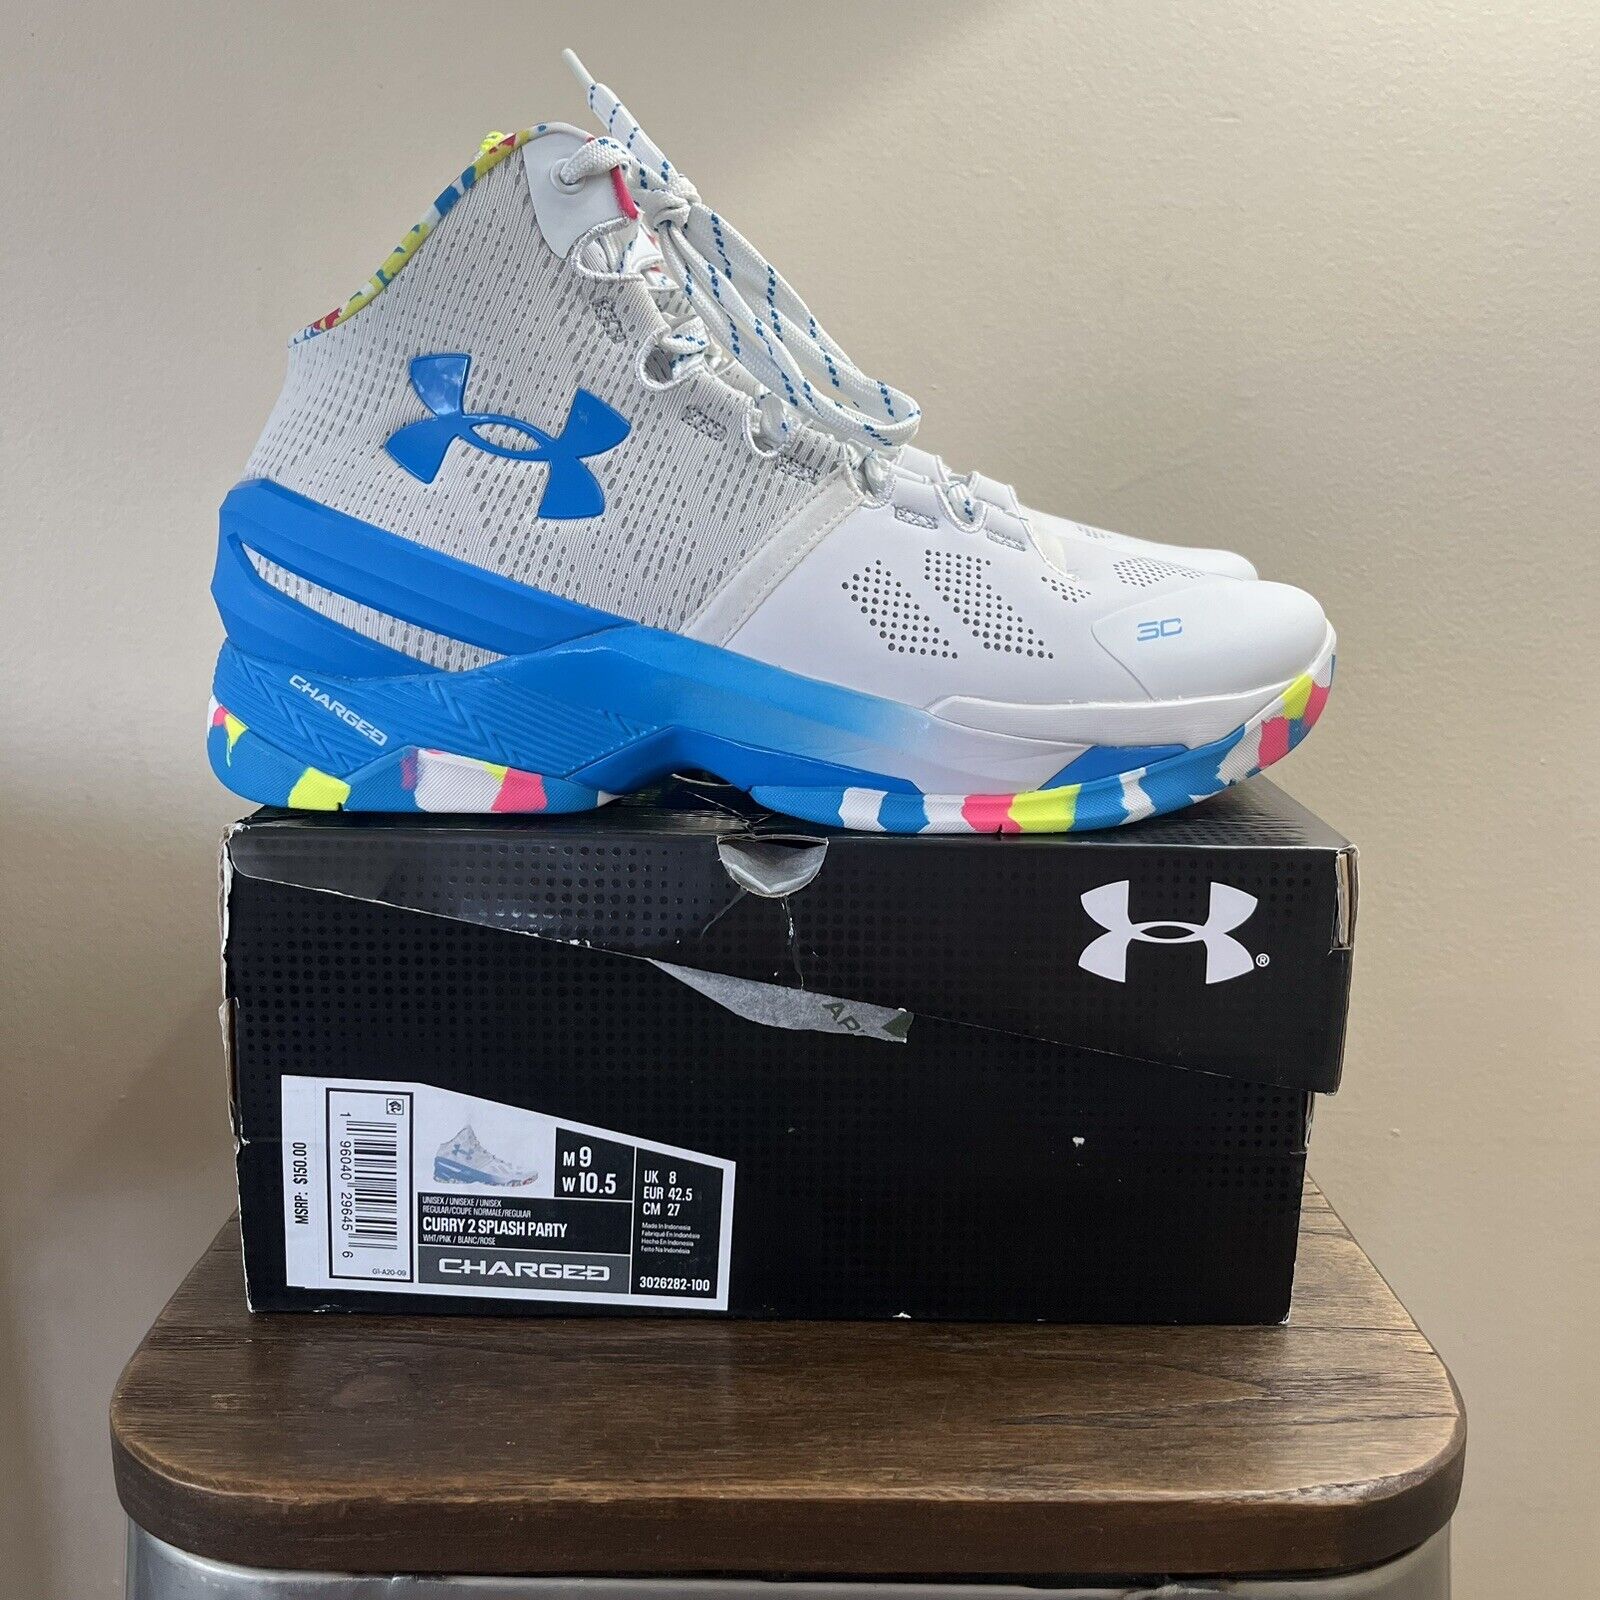 Huge Under Armour Curry 2 Splash Party White Basketball Shoes 3026282-100 Size 9 on eBay